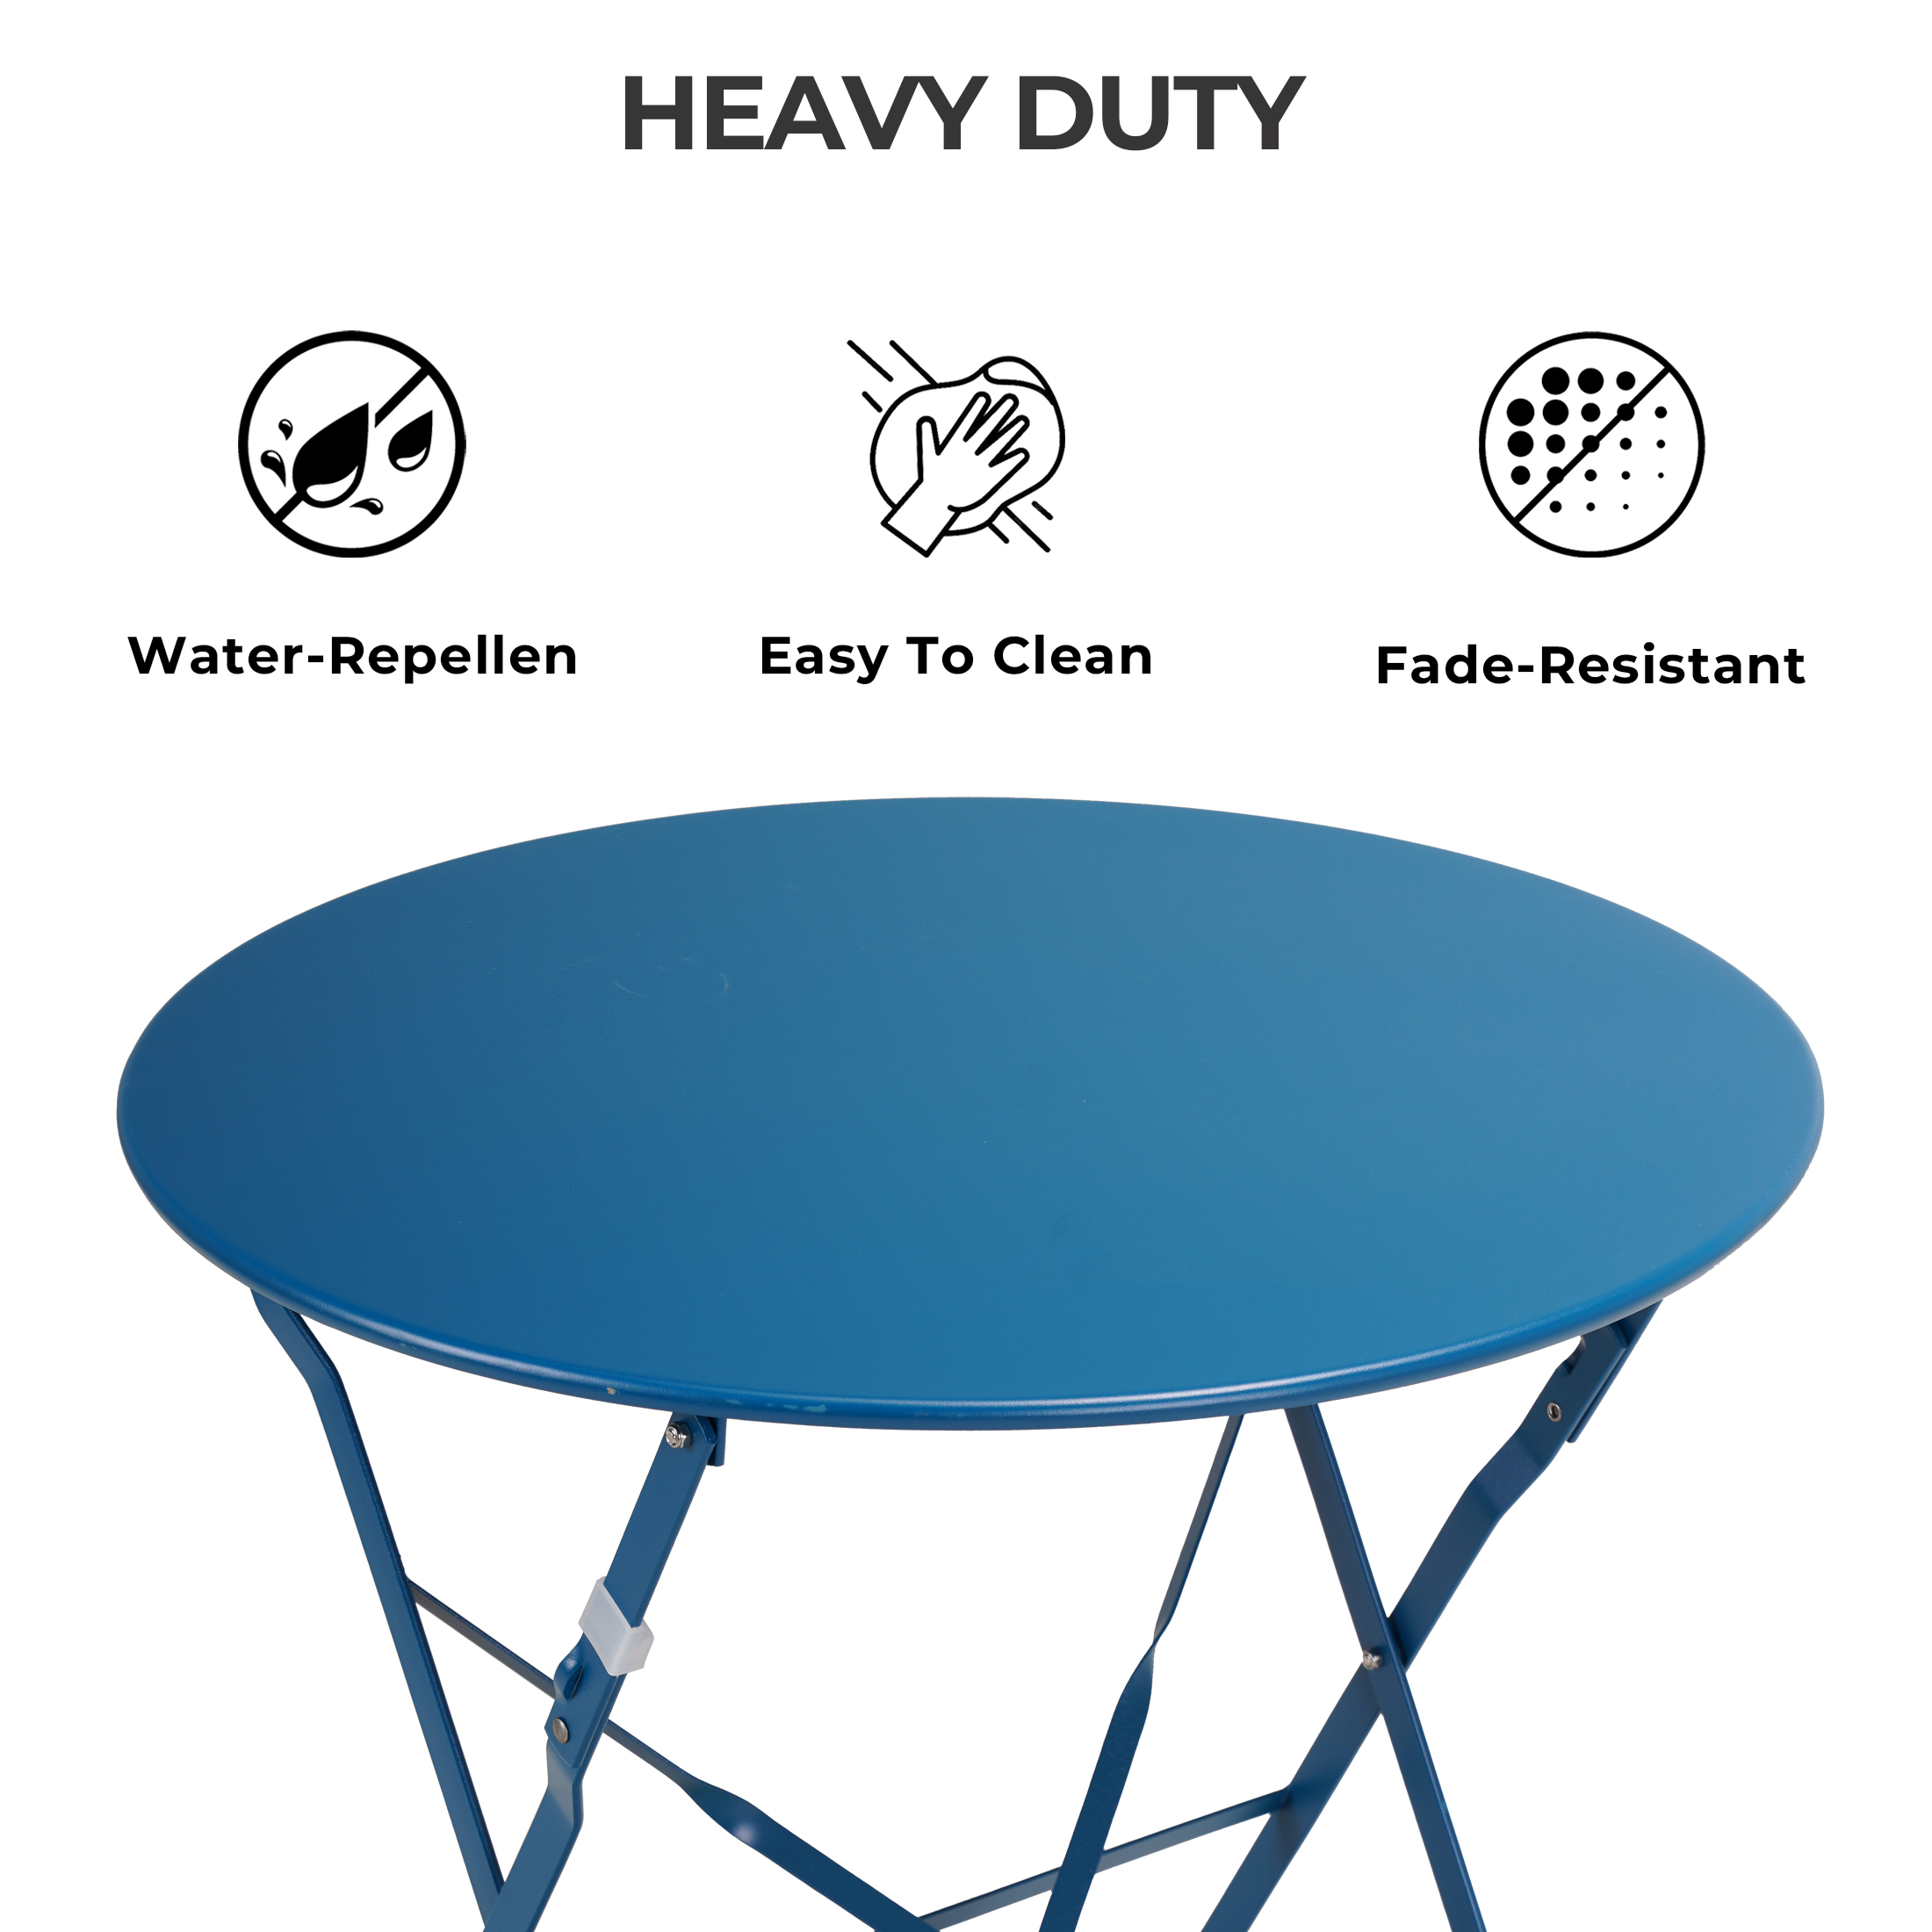 Grand Patio Metal 3-Piece Folding Bistro Table and Chairs Set, Outdoor Patio Dining Furniture for Small Spaces, Balcony, Peacock Blue - image 3 of 11